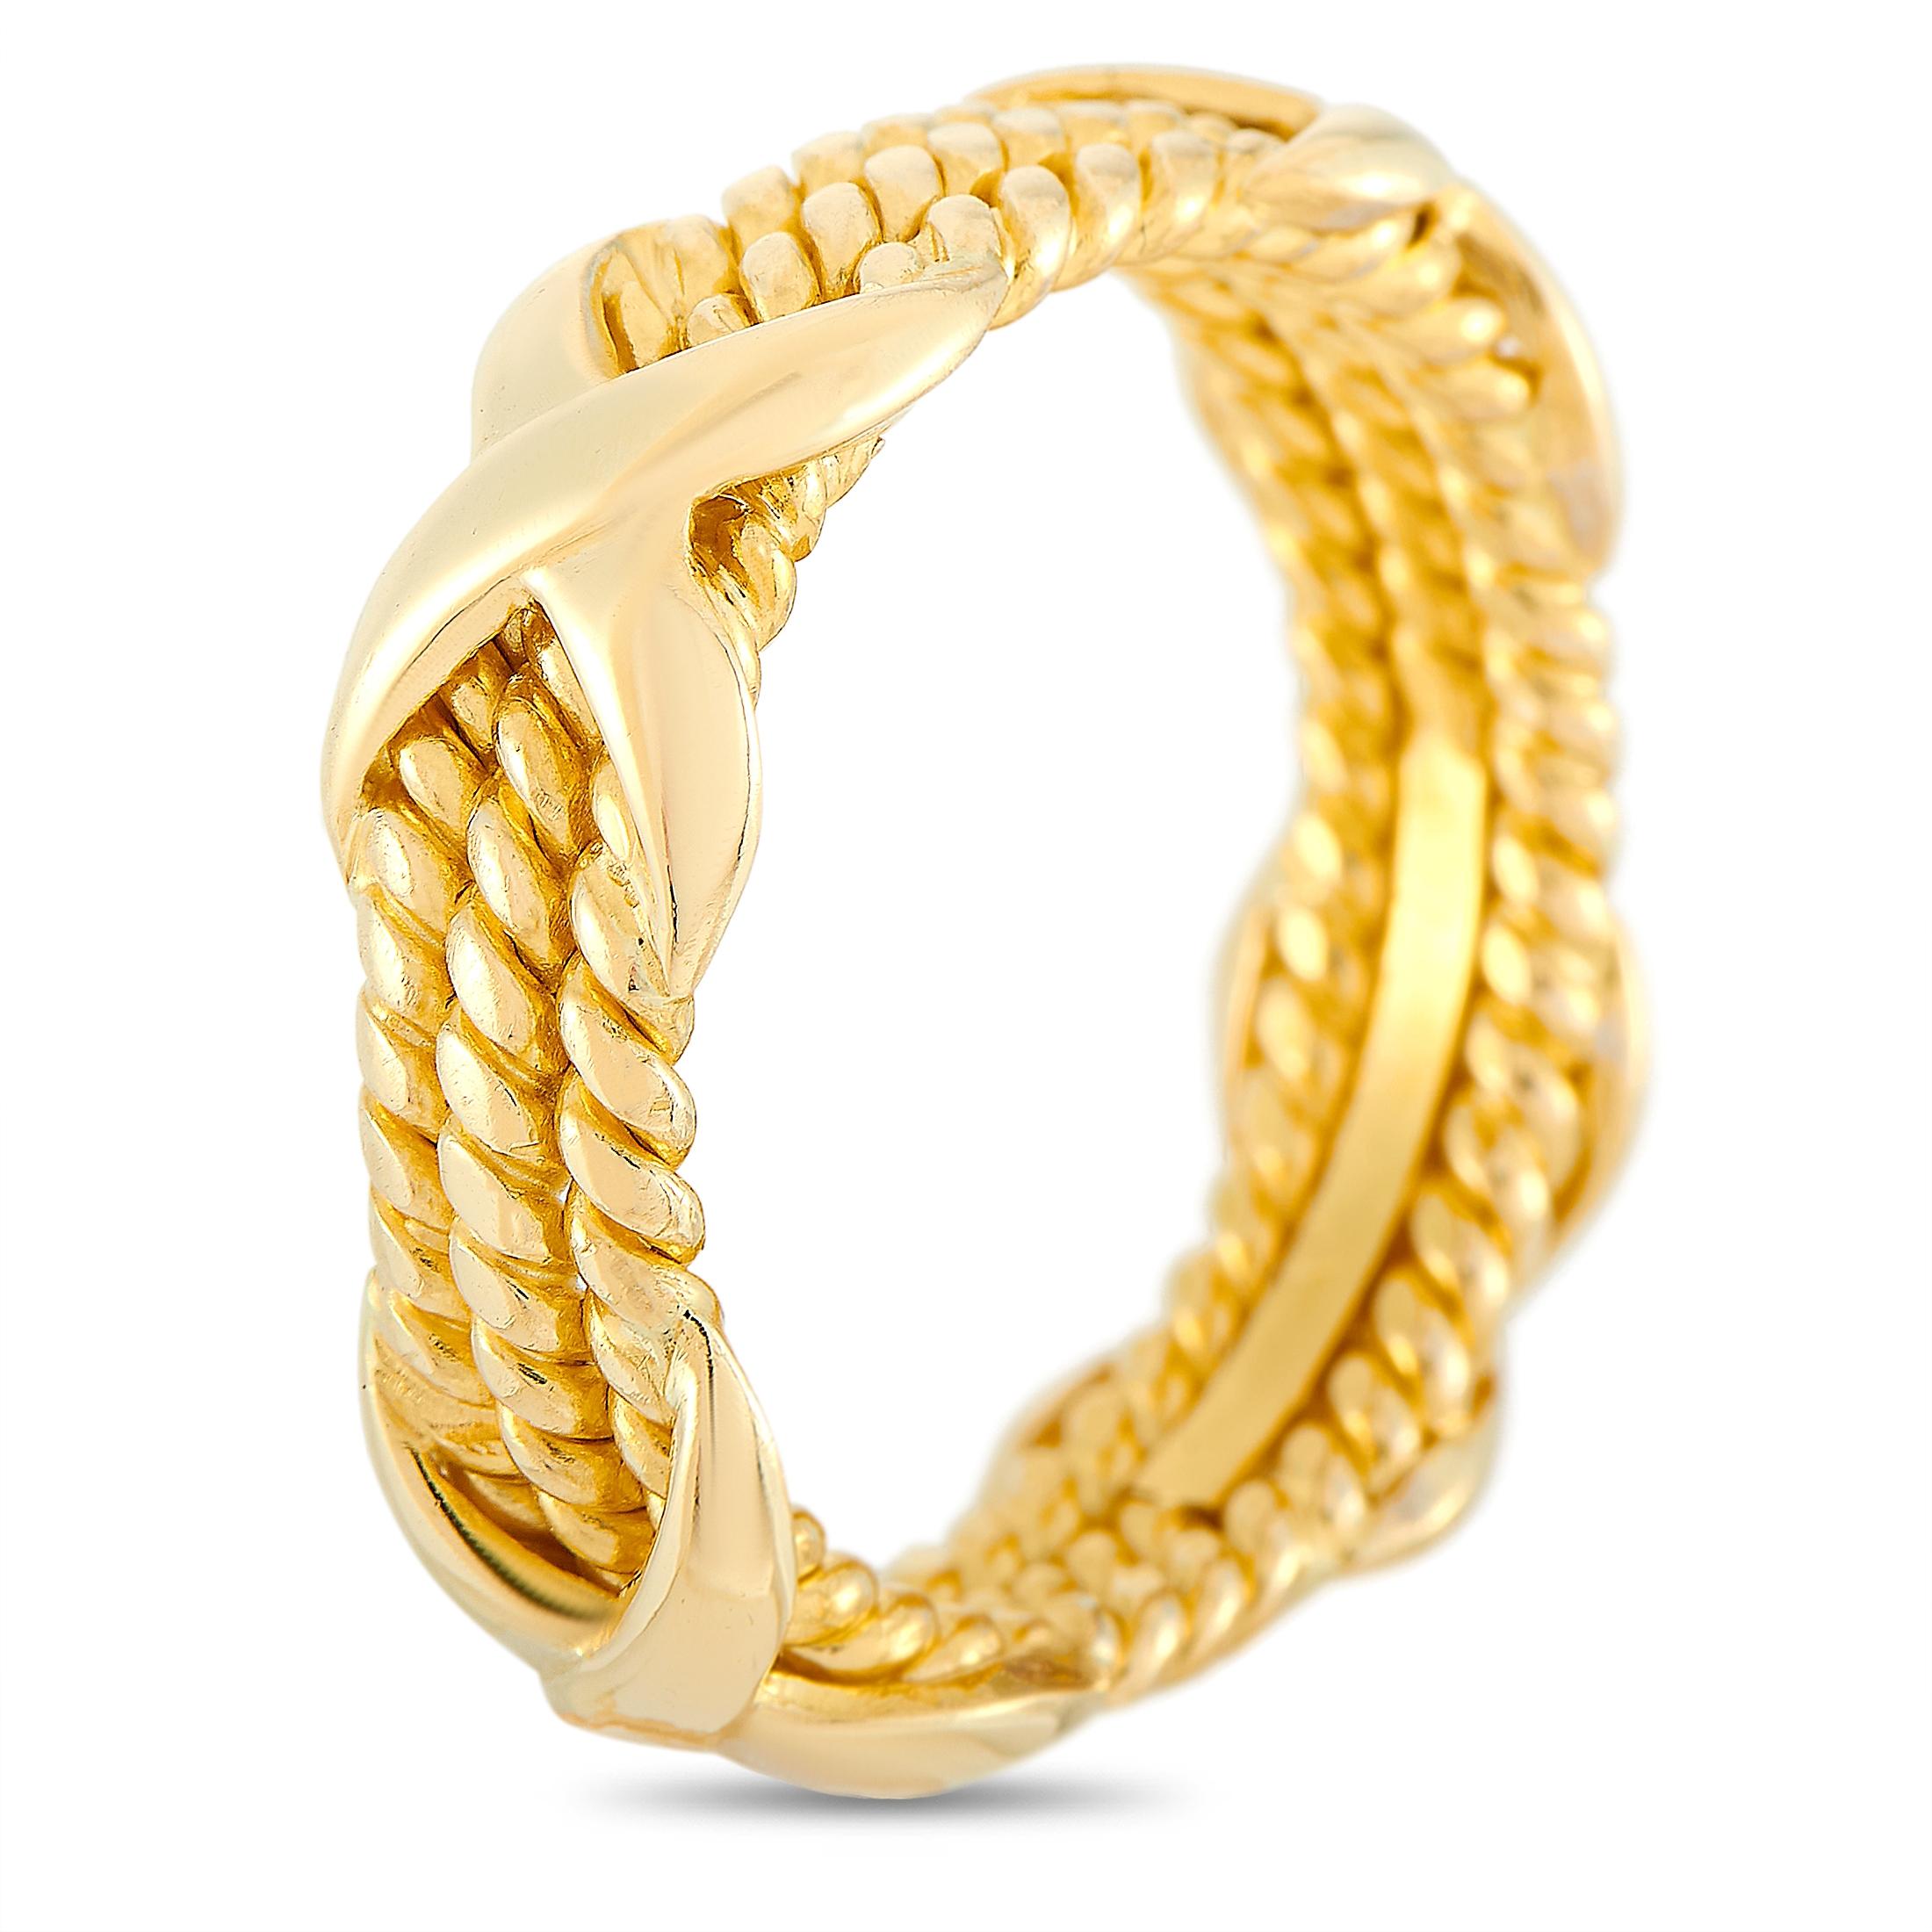 The Tiffany & Co. Schlumberger ring is crafted from 18K yellow gold and weighs 7.3 grams, boasting band thickness of 6 mm.

This item is offered in estate condition and includes the manufacturer’s box.
Ring Size: 7.0